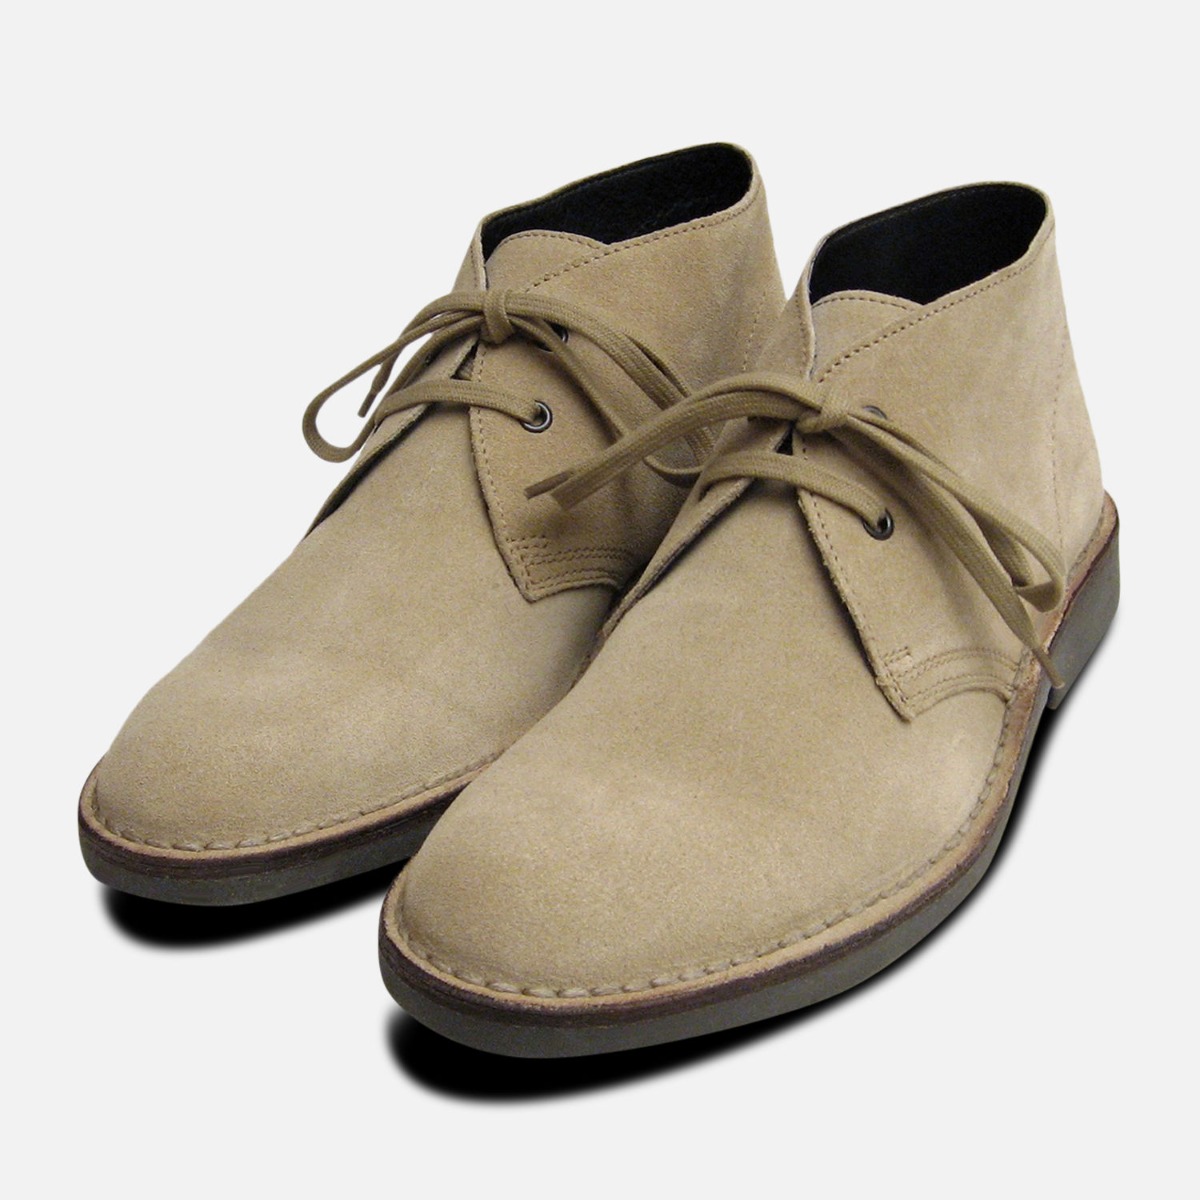 sand suede shoes